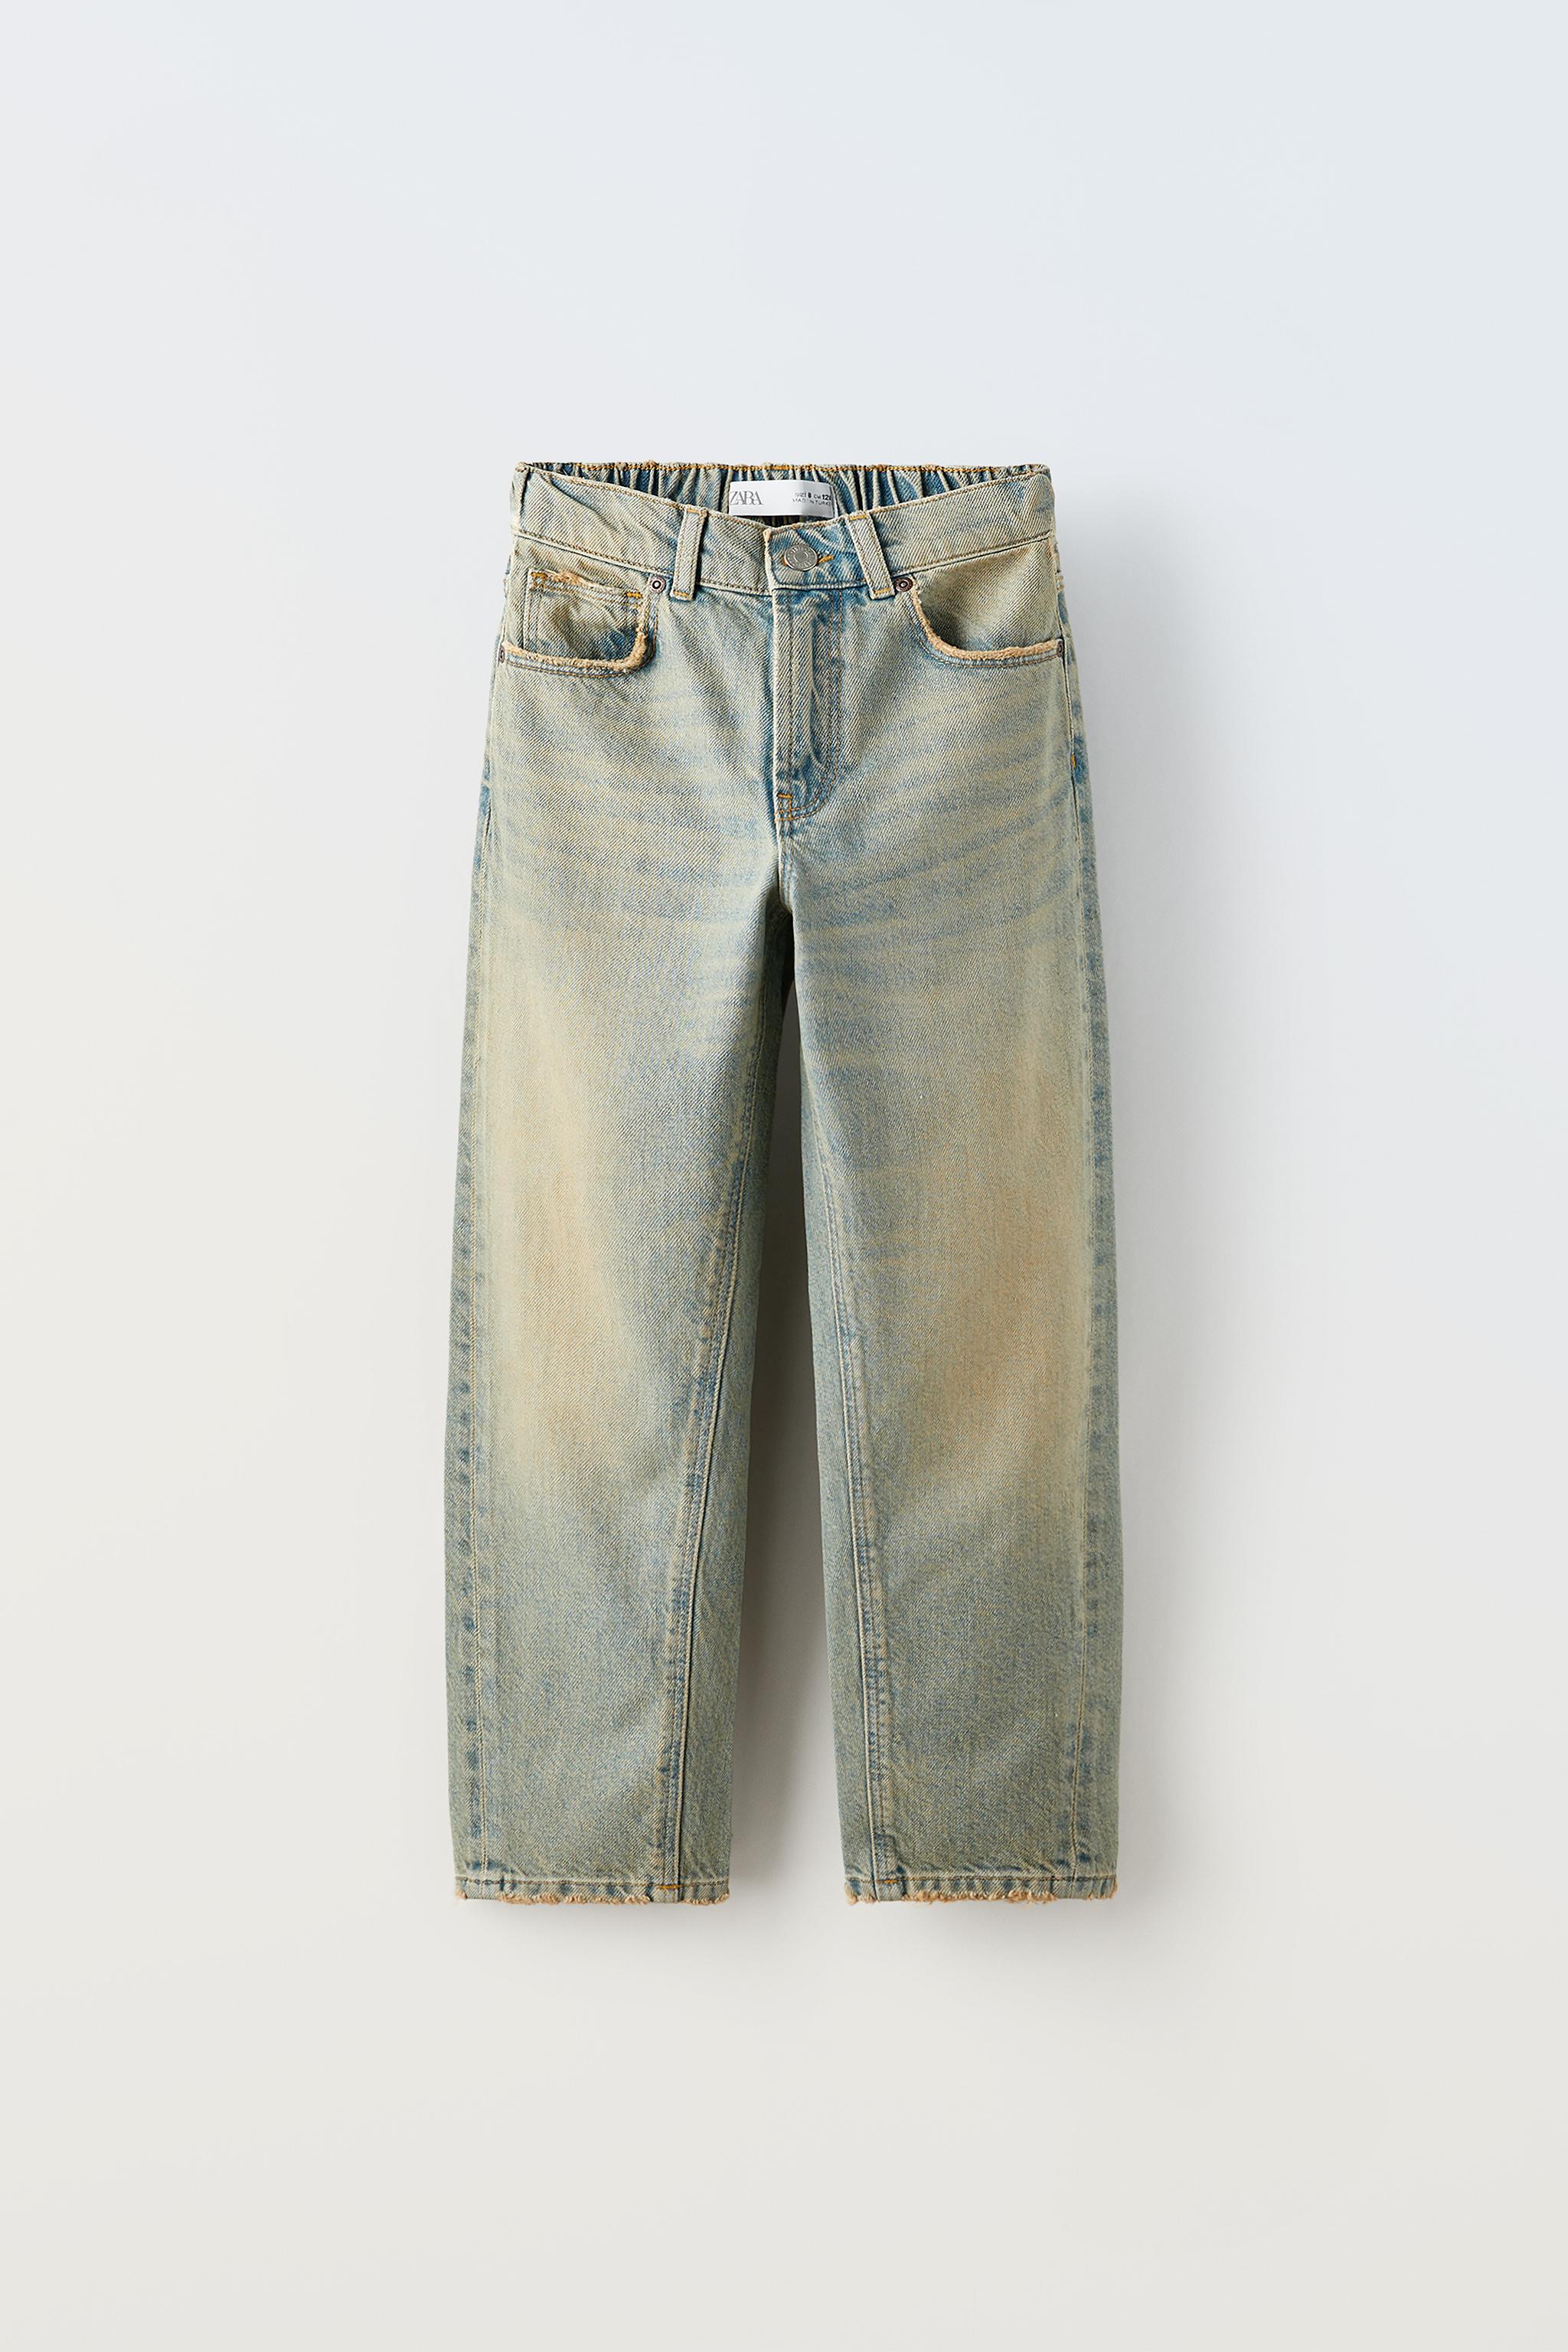 ZARA NEW MAN OVERDYED BAGGY JEANS PANT FADED SKY BLUE 3991/305